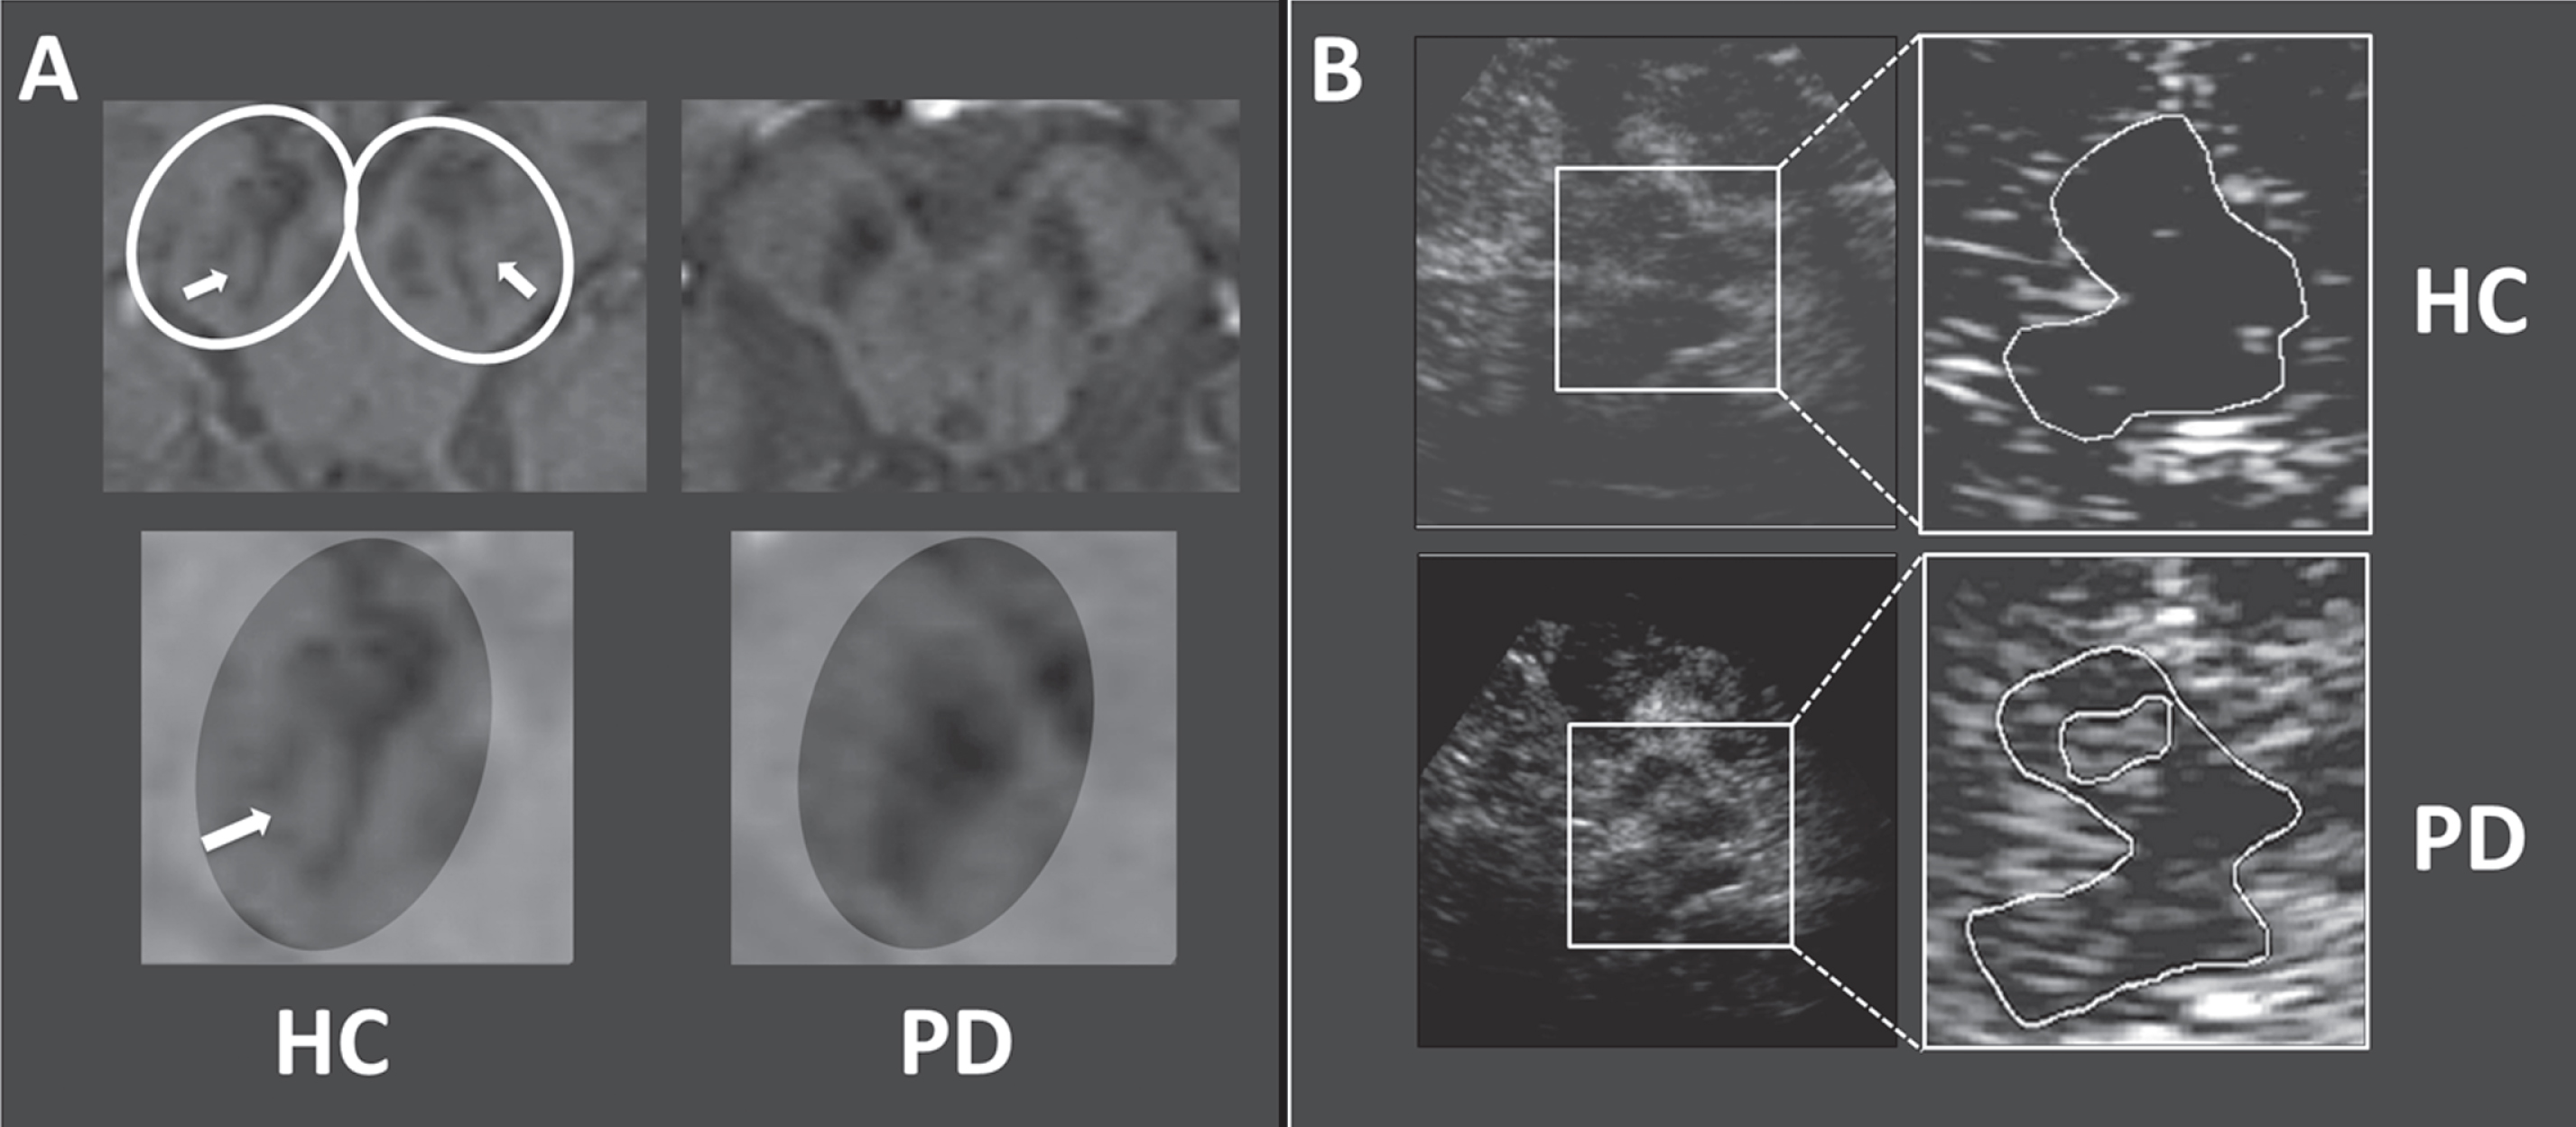 Midbrain / substantia nigra (SN) imaging with magnetic resonance imaging (MRI) and Transcranial sonography (TCS). A: Susceptibility weighted (SWI) MRI image of a healthy control (HC) at the left column, demonstrating the magnified dorsolateral nigral hyperintensity within the right SN. White arrows mark the dorsolateral nigral hyperintensity in the survey as well as in the magnified illustration. The right column show SWI images of a patient with Parkinson’s disease (PD), demonstrating the absence of the dorsolateral nigral hyperintensity. B: TCS images of mesencaphalic scanning planes showing typically butterfly-shaped mesencephalic brainstems from a HC with a normal midbrain echogenicity in the upper images. A PD patient with an enlarged midbrain echogenicity at the area of the SN (SN-hyperechogenicity) is shown in the lower images.